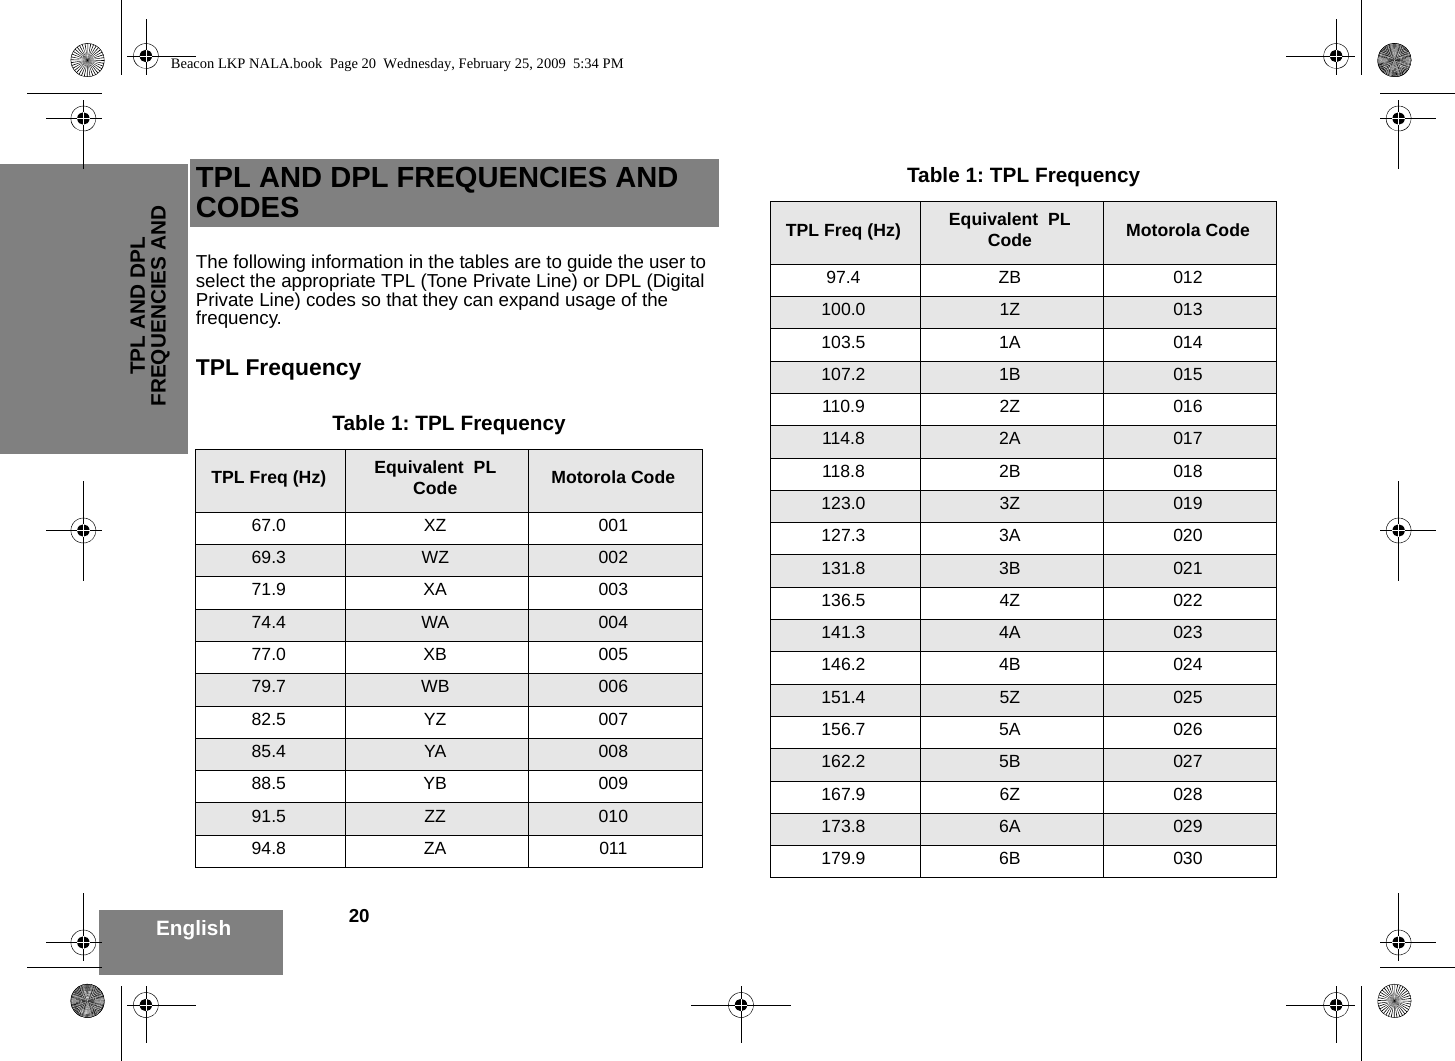 20EnglishTPL AND DPL FREQUENCIES AND TPL AND DPL FREQUENCIES AND CODESThe following information in the tables are to guide the user to select the appropriate TPL (Tone Private Line) or DPL (Digital Private Line) codes so that they can expand usage of the frequency. TPL FrequencyTable 1: TPL FrequencyTPL Freq (Hz) Equivalent  PL Code Motorola Code67.0 XZ 00169.3 WZ 00271.9 XA 00374.4 WA 00477.0 XB 00579.7 WB 00682.5 YZ 00785.4 YA 00888.5 YB 00991.5 ZZ 01094.8 ZA 01197.4 ZB 012100.0 1Z 013103.5 1A 014107.2 1B 015110.9 2Z 016114.8 2A 017118.8 2B 018123.0 3Z 019127.3 3A 020131.8 3B 021136.5 4Z 022141.3 4A 023146.2 4B 024151.4 5Z 025156.7 5A 026162.2 5B 027167.9 6Z 028173.8 6A 029179.9 6B 030Table 1: TPL FrequencyTPL Freq (Hz) Equivalent  PL Code Motorola CodeBeacon LKP NALA.book  Page 20  Wednesday, February 25, 2009  5:34 PM